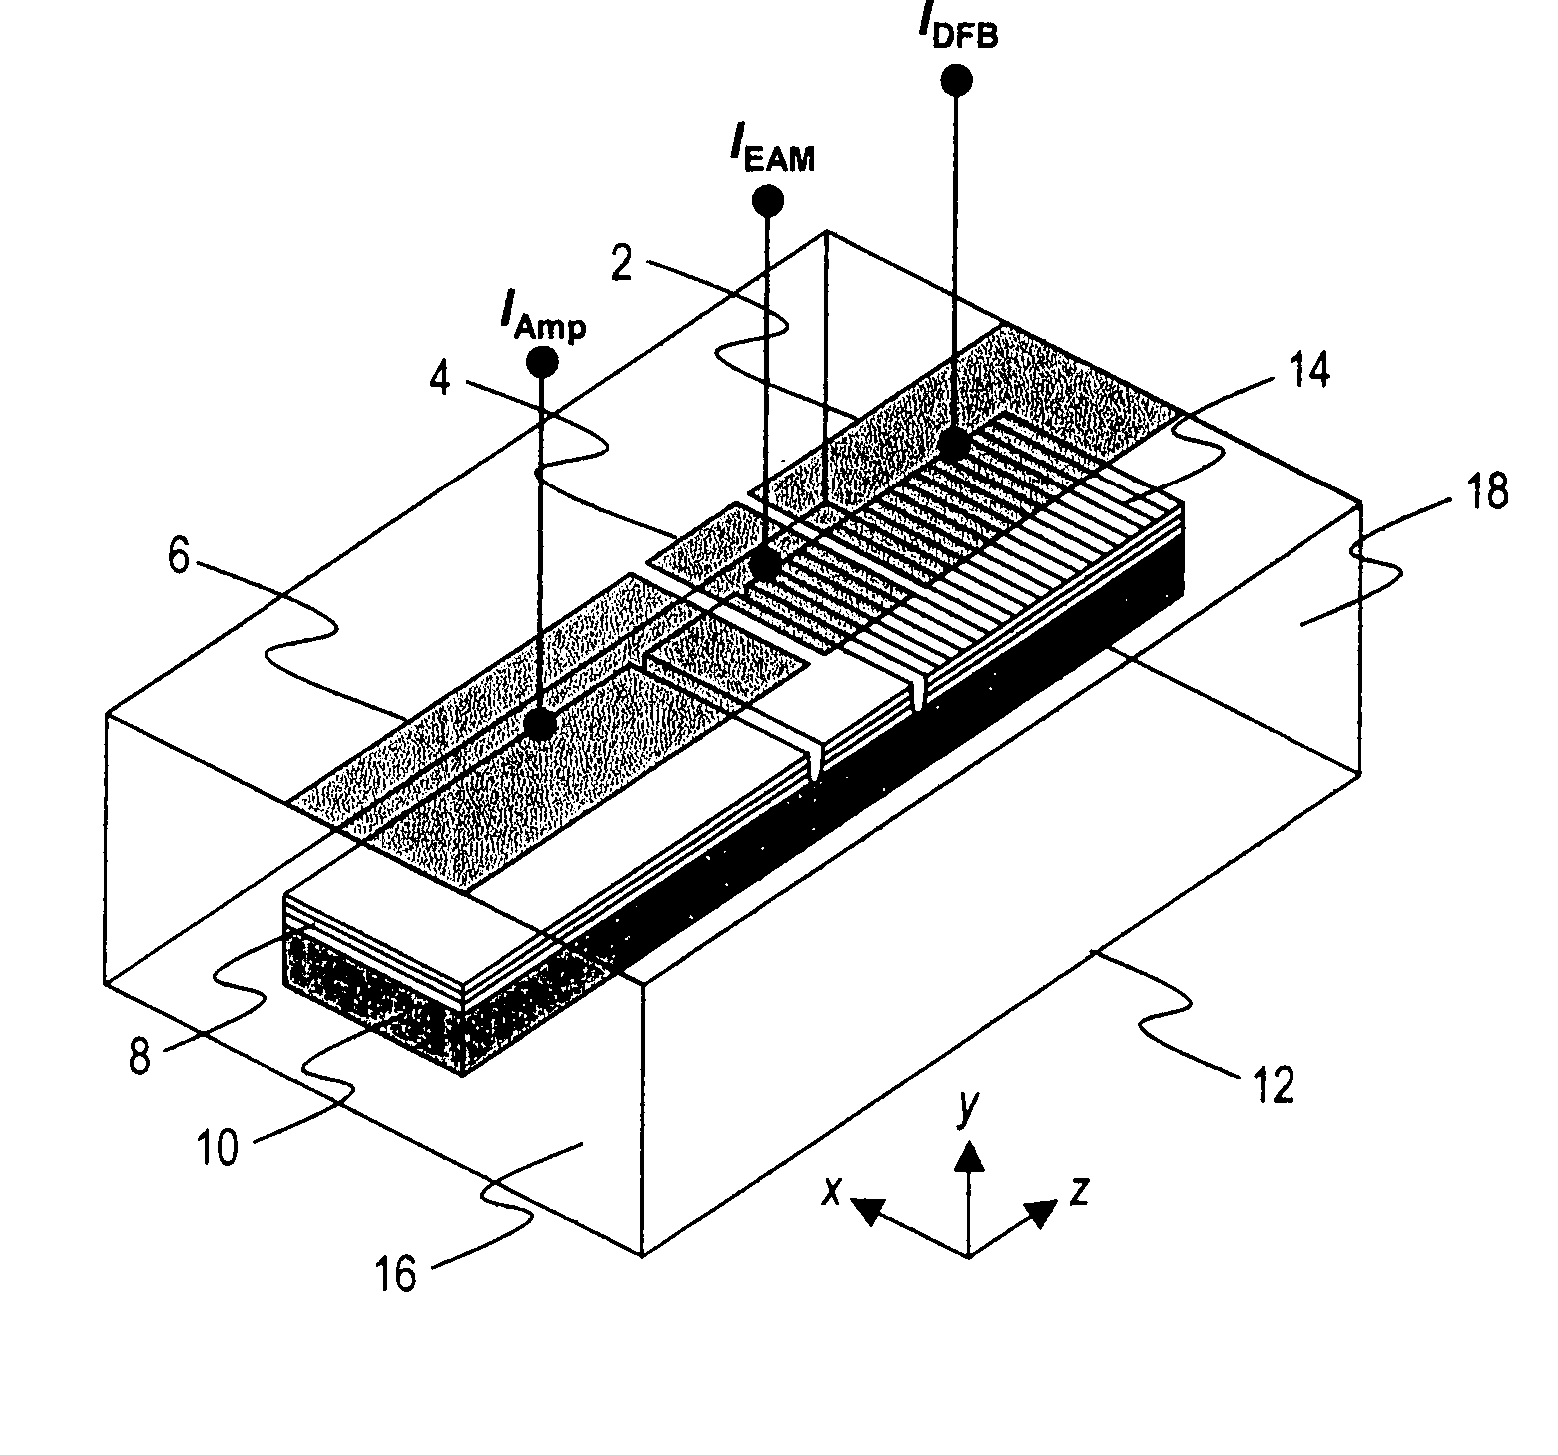 Planar waveguide surface emitting laser and photonic integrated circuit